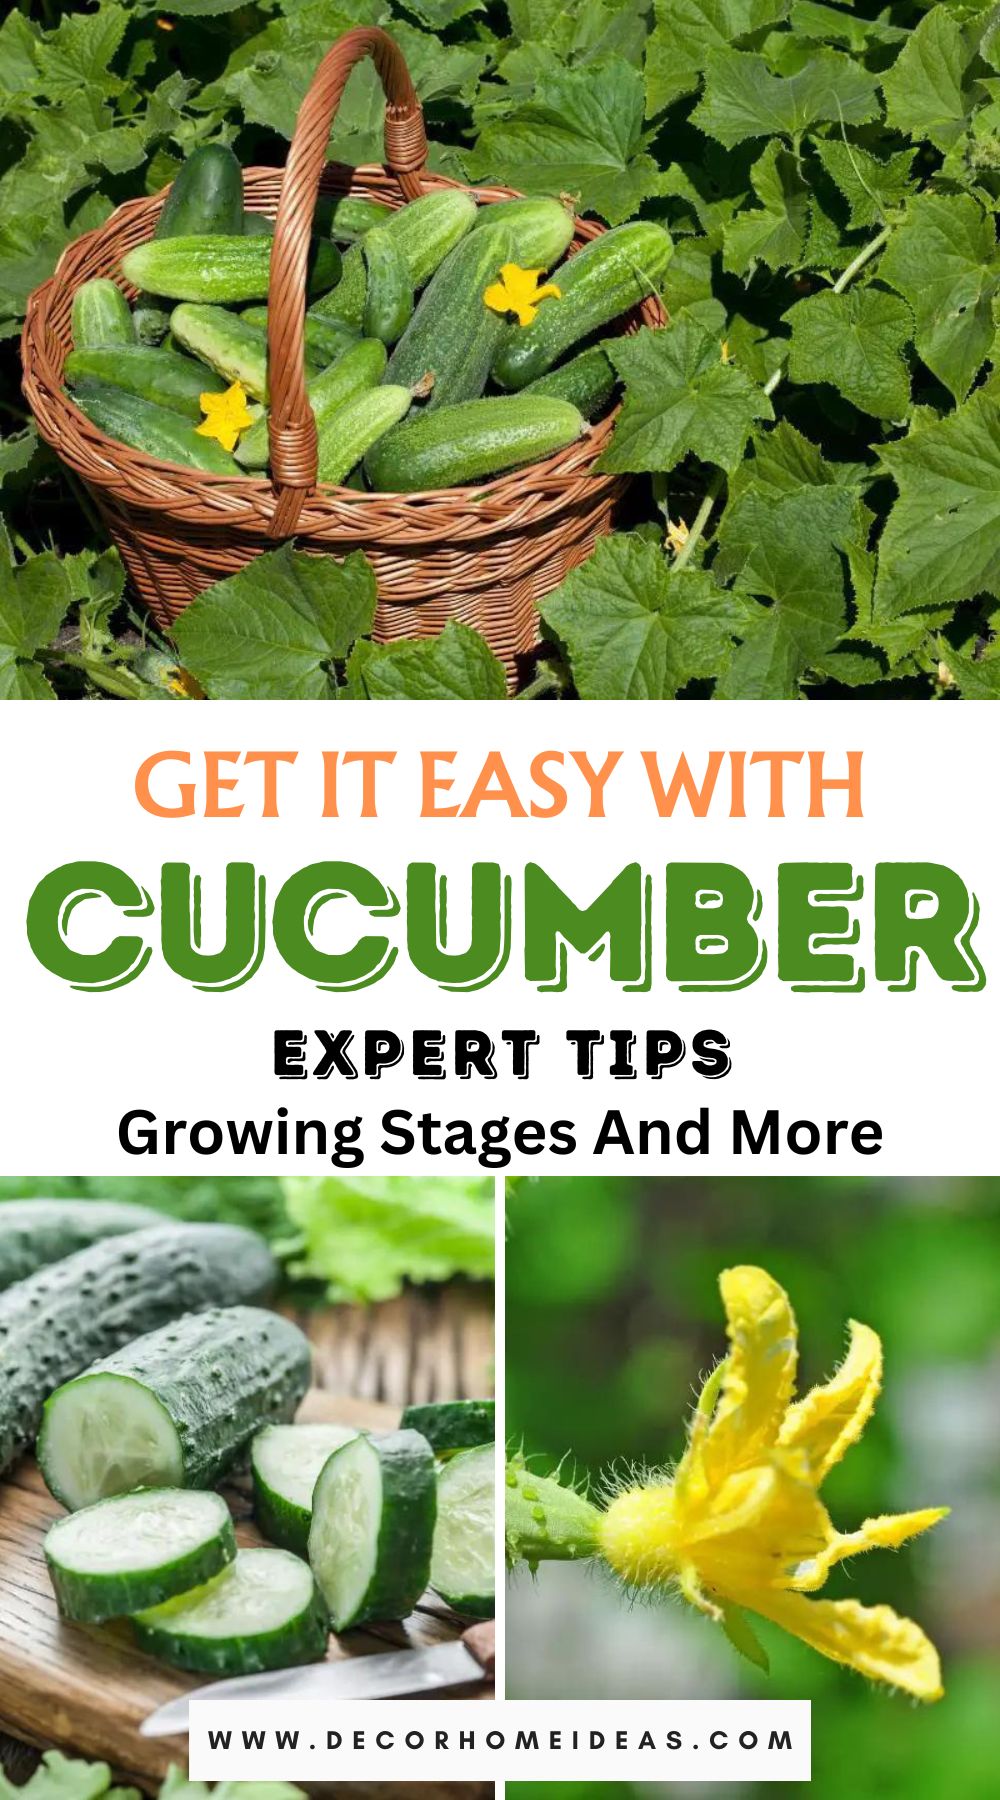 Looking for expert tips on growing cucumbers? Get hassle-free guidance on cucumber growing stages and much more with Cucumber Expert Tips.